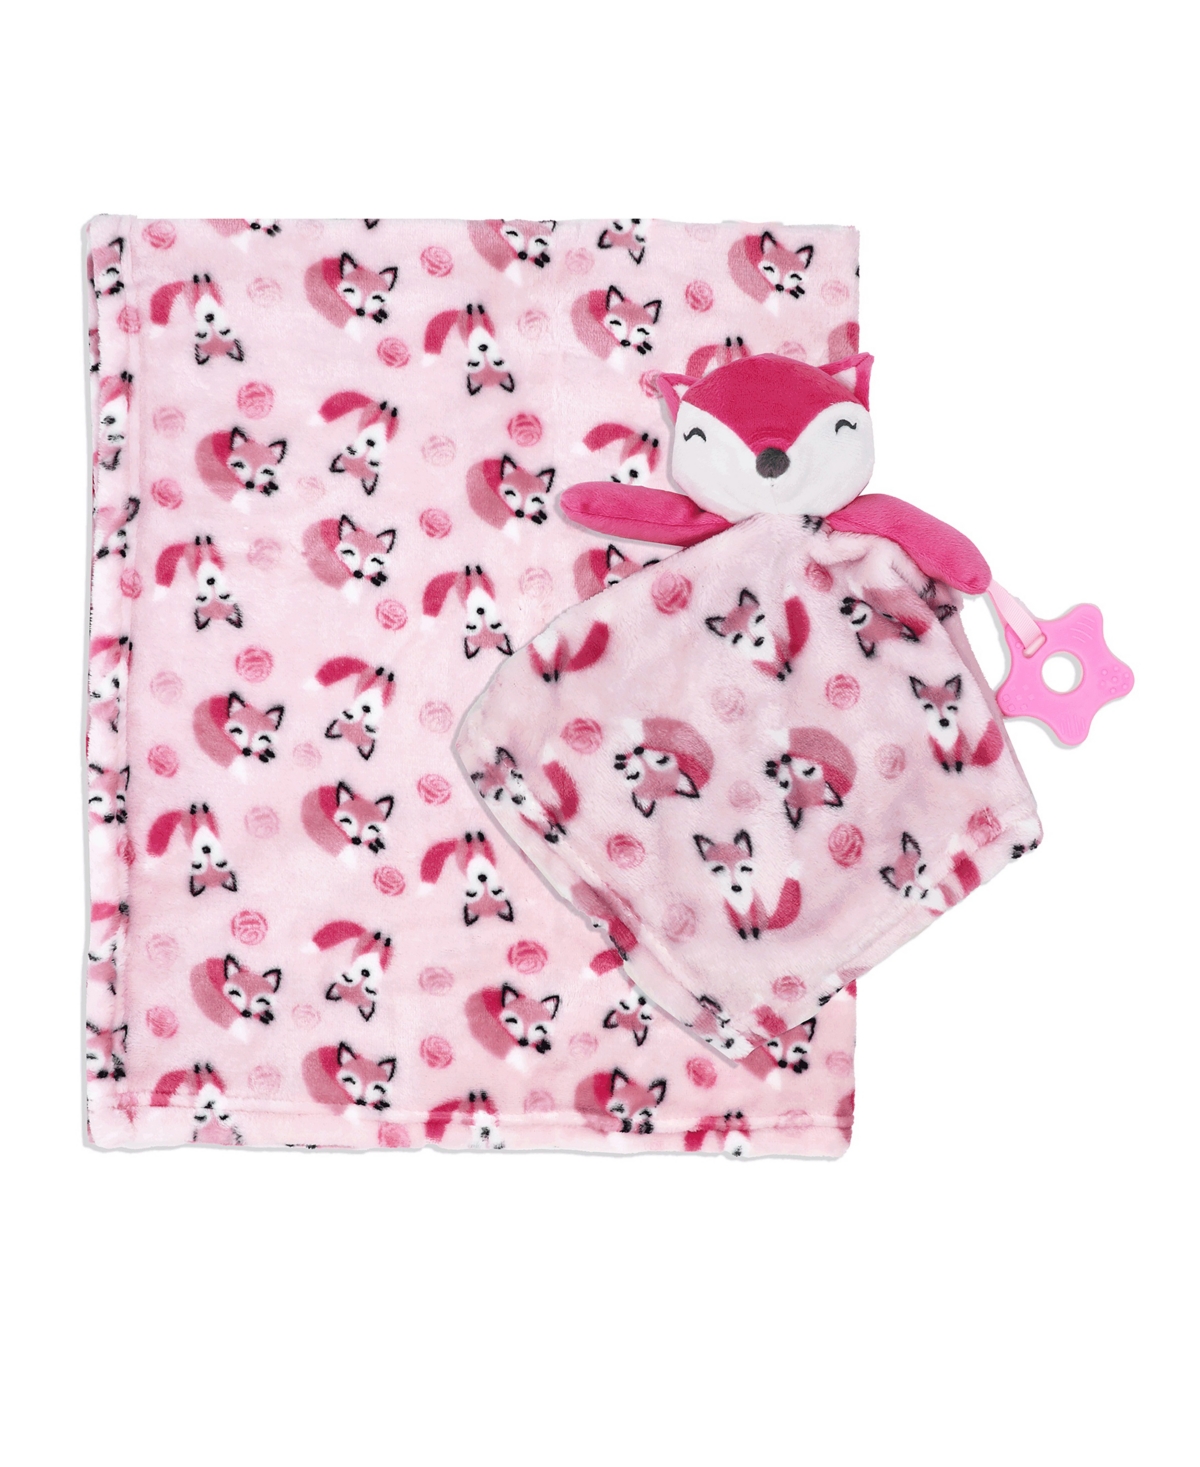 3 Stories Trading Baby Girls Blanket, Nunu And Teether, 3 Piece Set In Pink